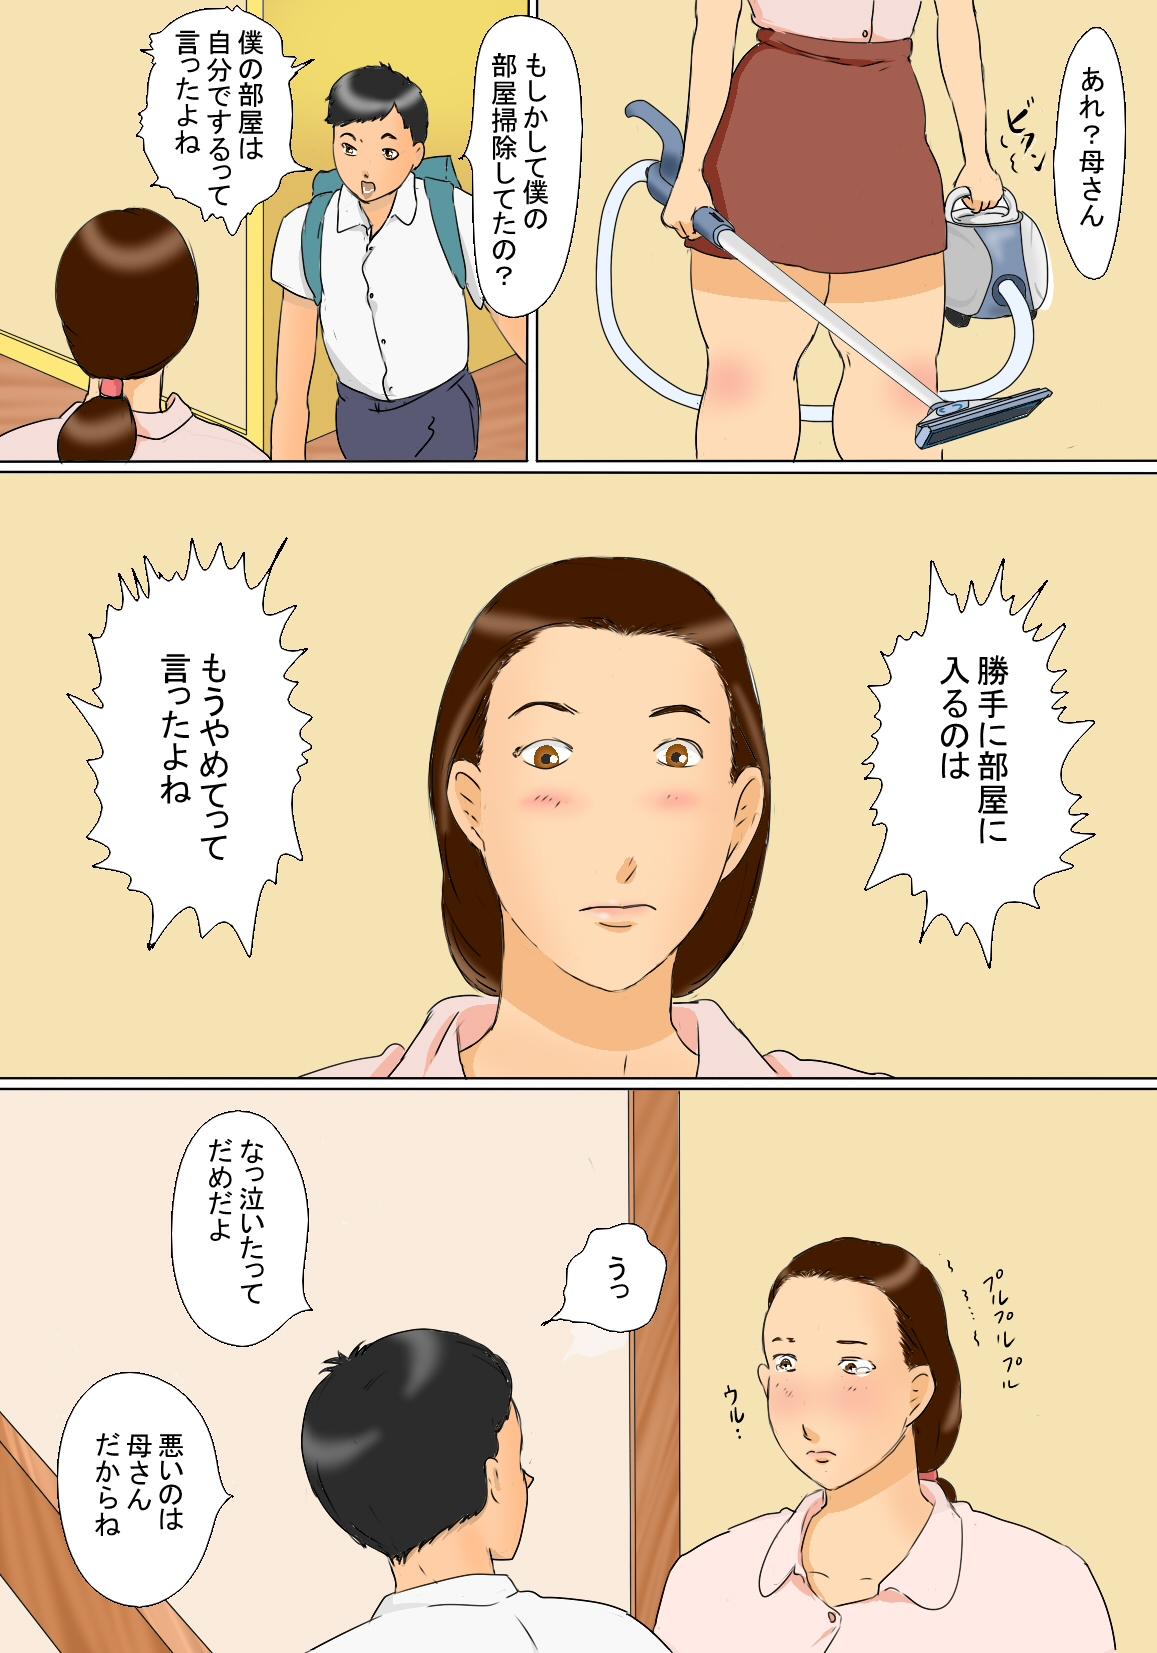 Best Blowjob Kanako Mama no Delivery Kissing - Page 3